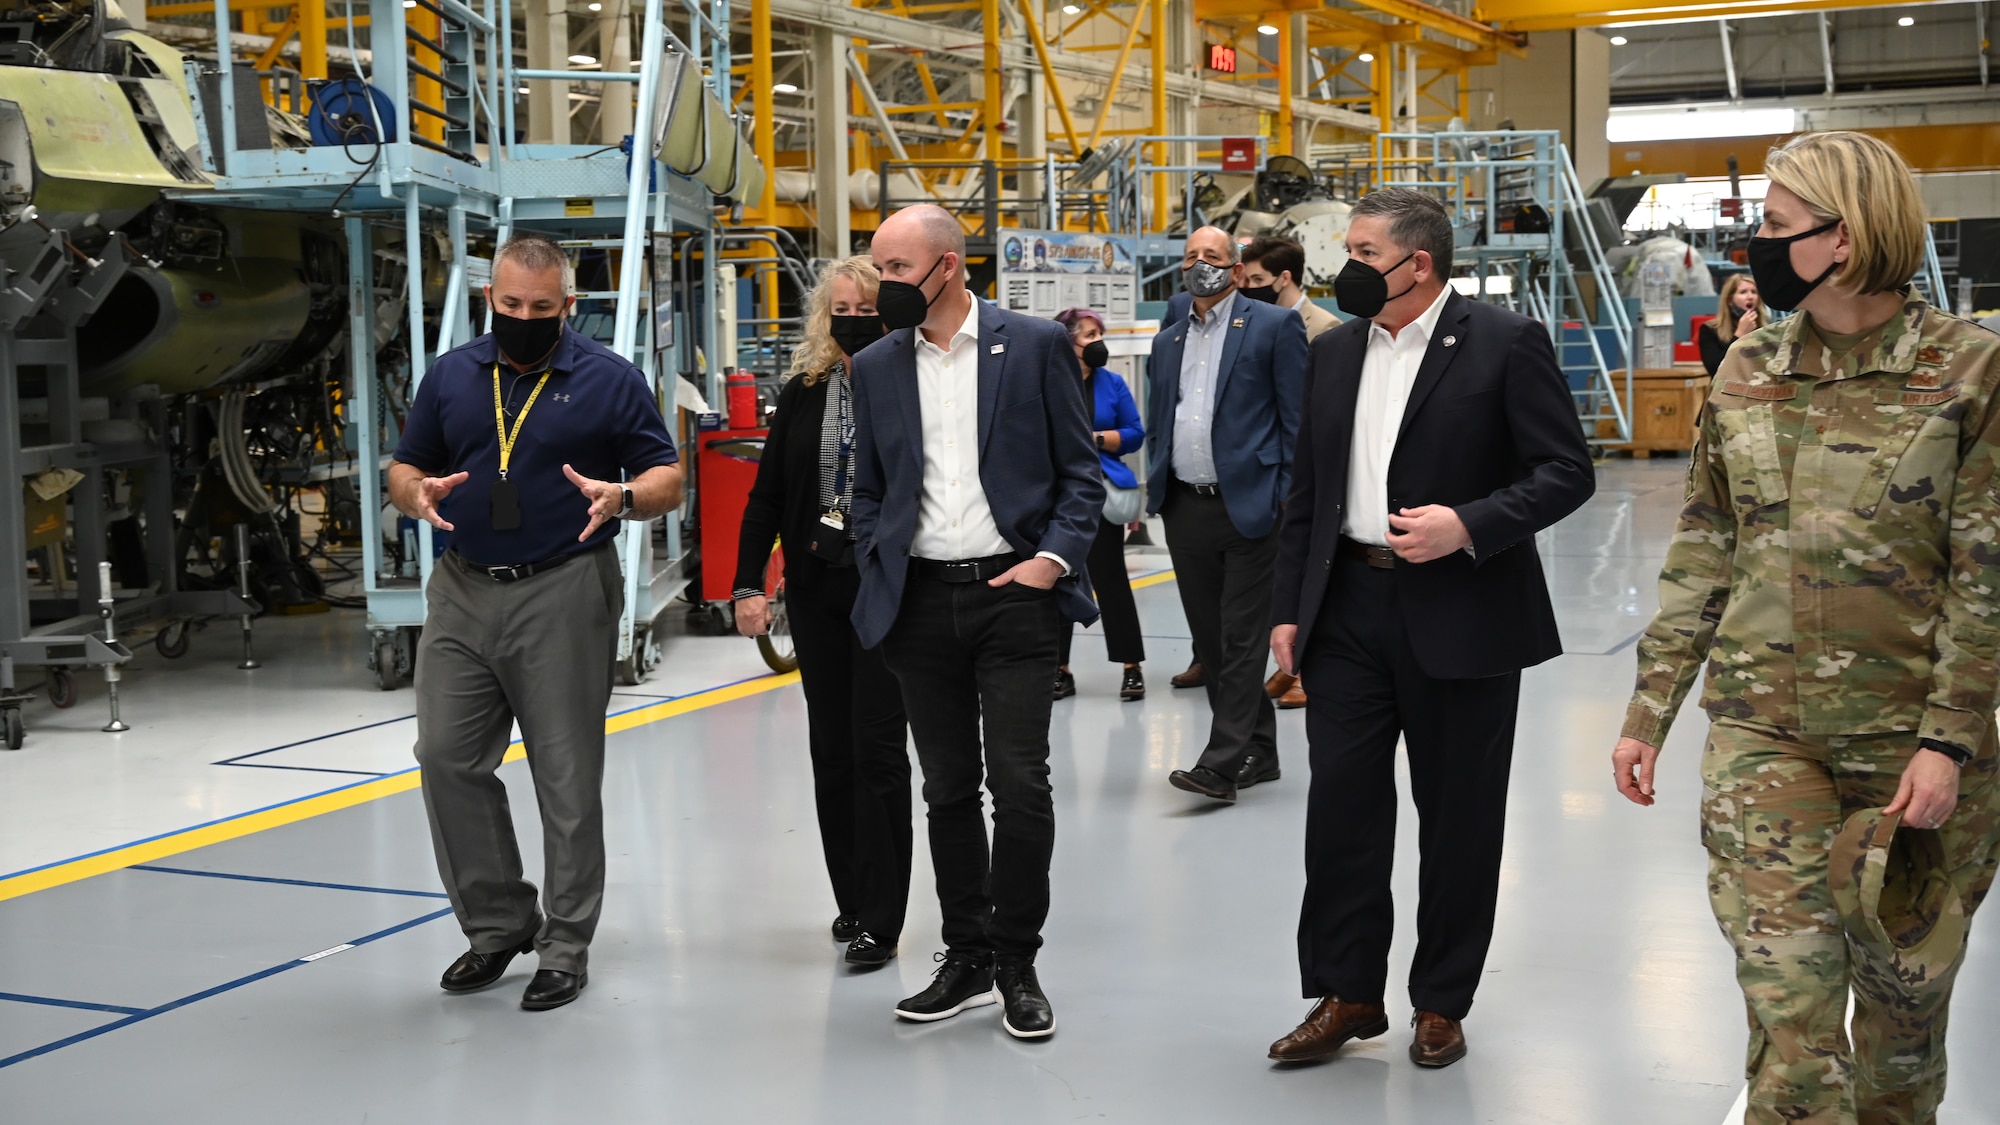 Utah Gov. Spencer Cox tours Hill Air Force Base, Utah, May 5, 2021. The tour provided the governor an overview of missions performed at Hill.